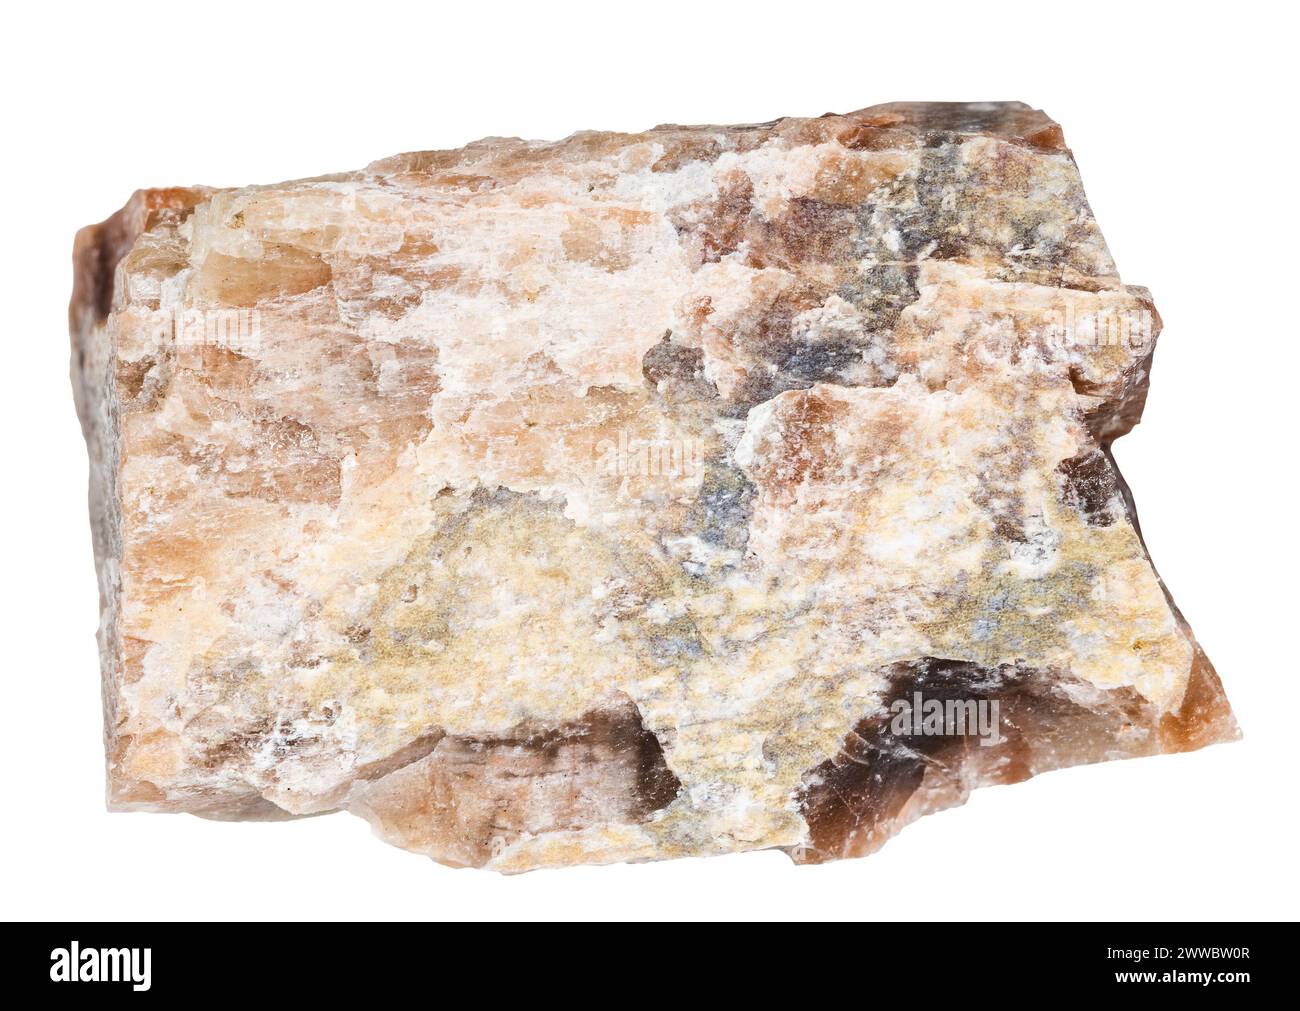 close up of sample of natural stone from geological collection - unpolished nepheline mineral isolated on white background from Kurochkin Log deposit, Stock Photo